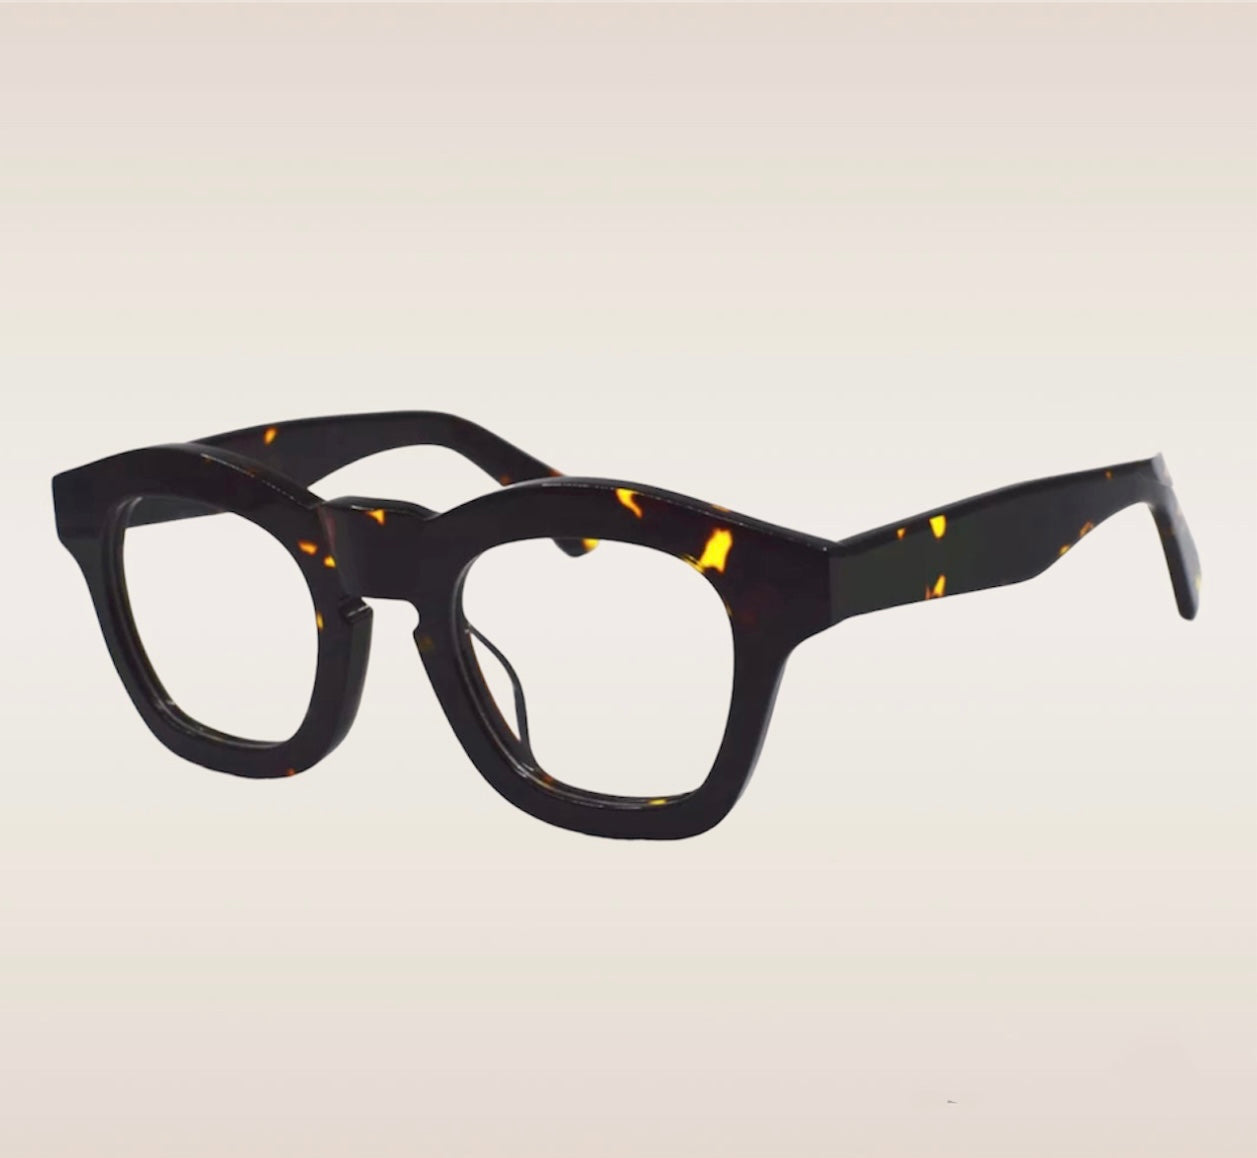 These glasses feature a sleek black frame with eye-catching yellow specs, adding a pop of color to your eyewear collection. With their versatile design and attention-grabbing details, these glasses are sure to make a bold fashion statement.